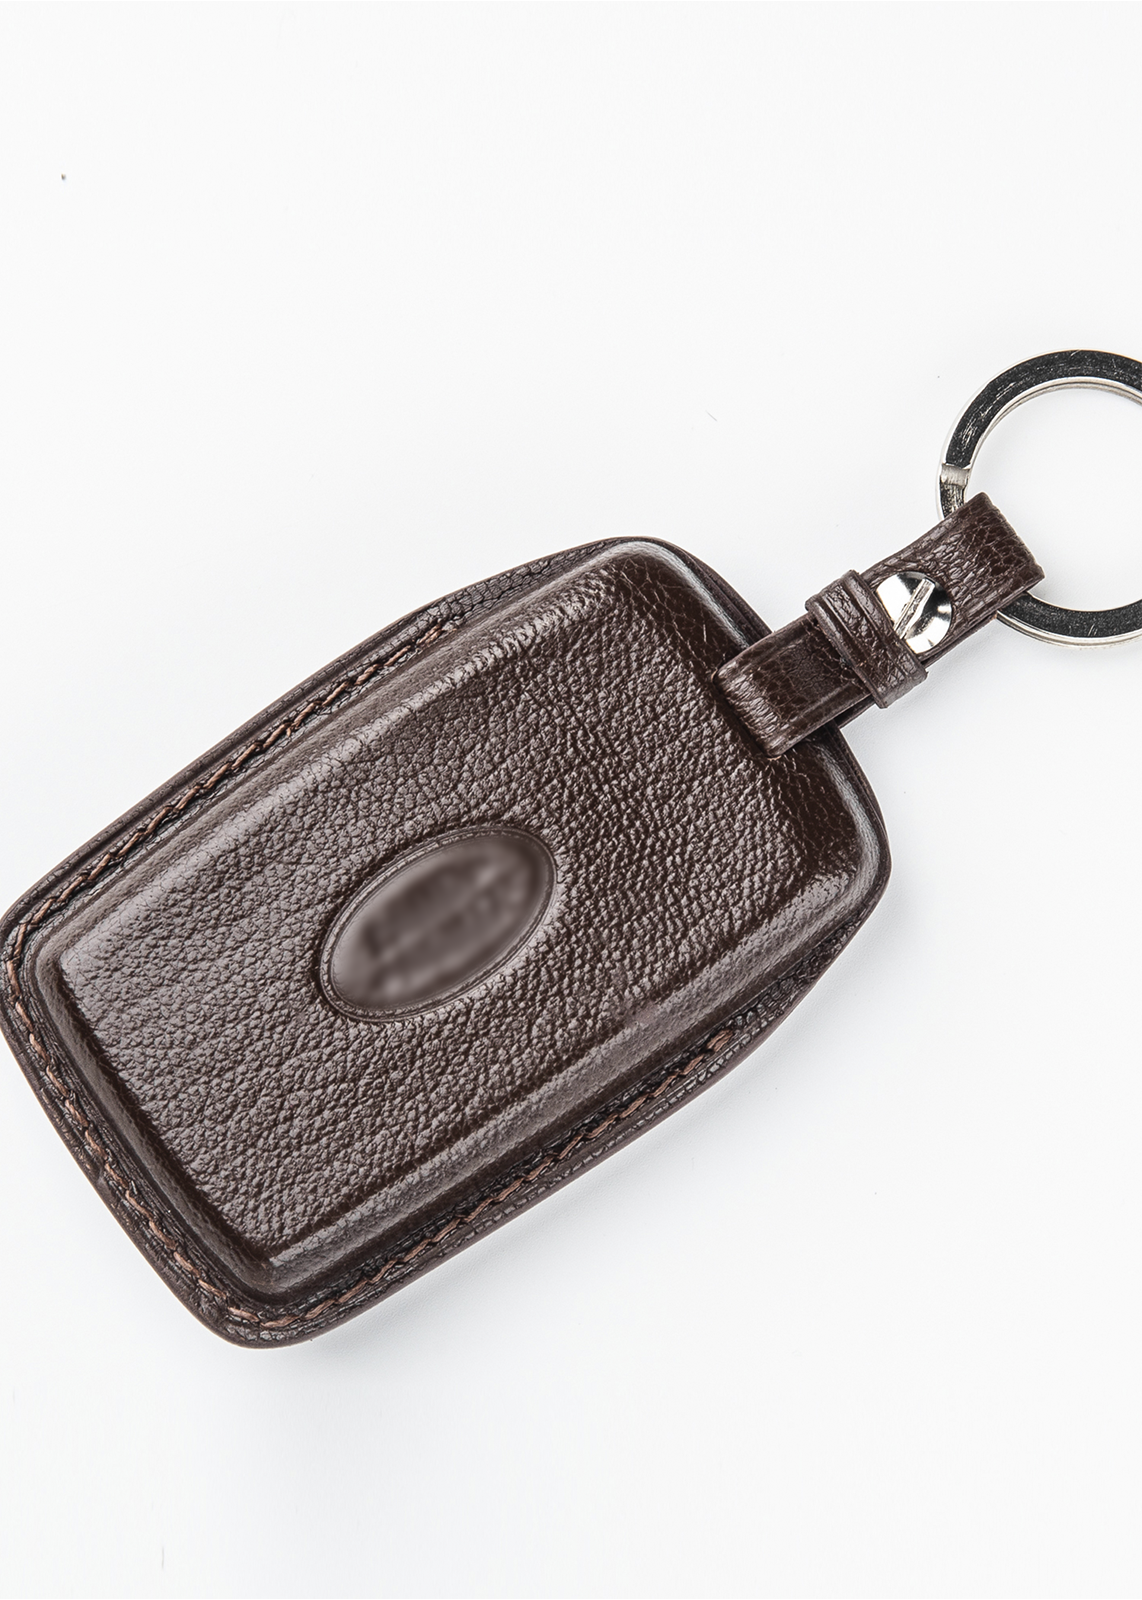 Timotheus for Land Rover key fob cover case, Compatible with Land Rover key case, Handmade Genuine Leather for Land Rover keychains | LR11